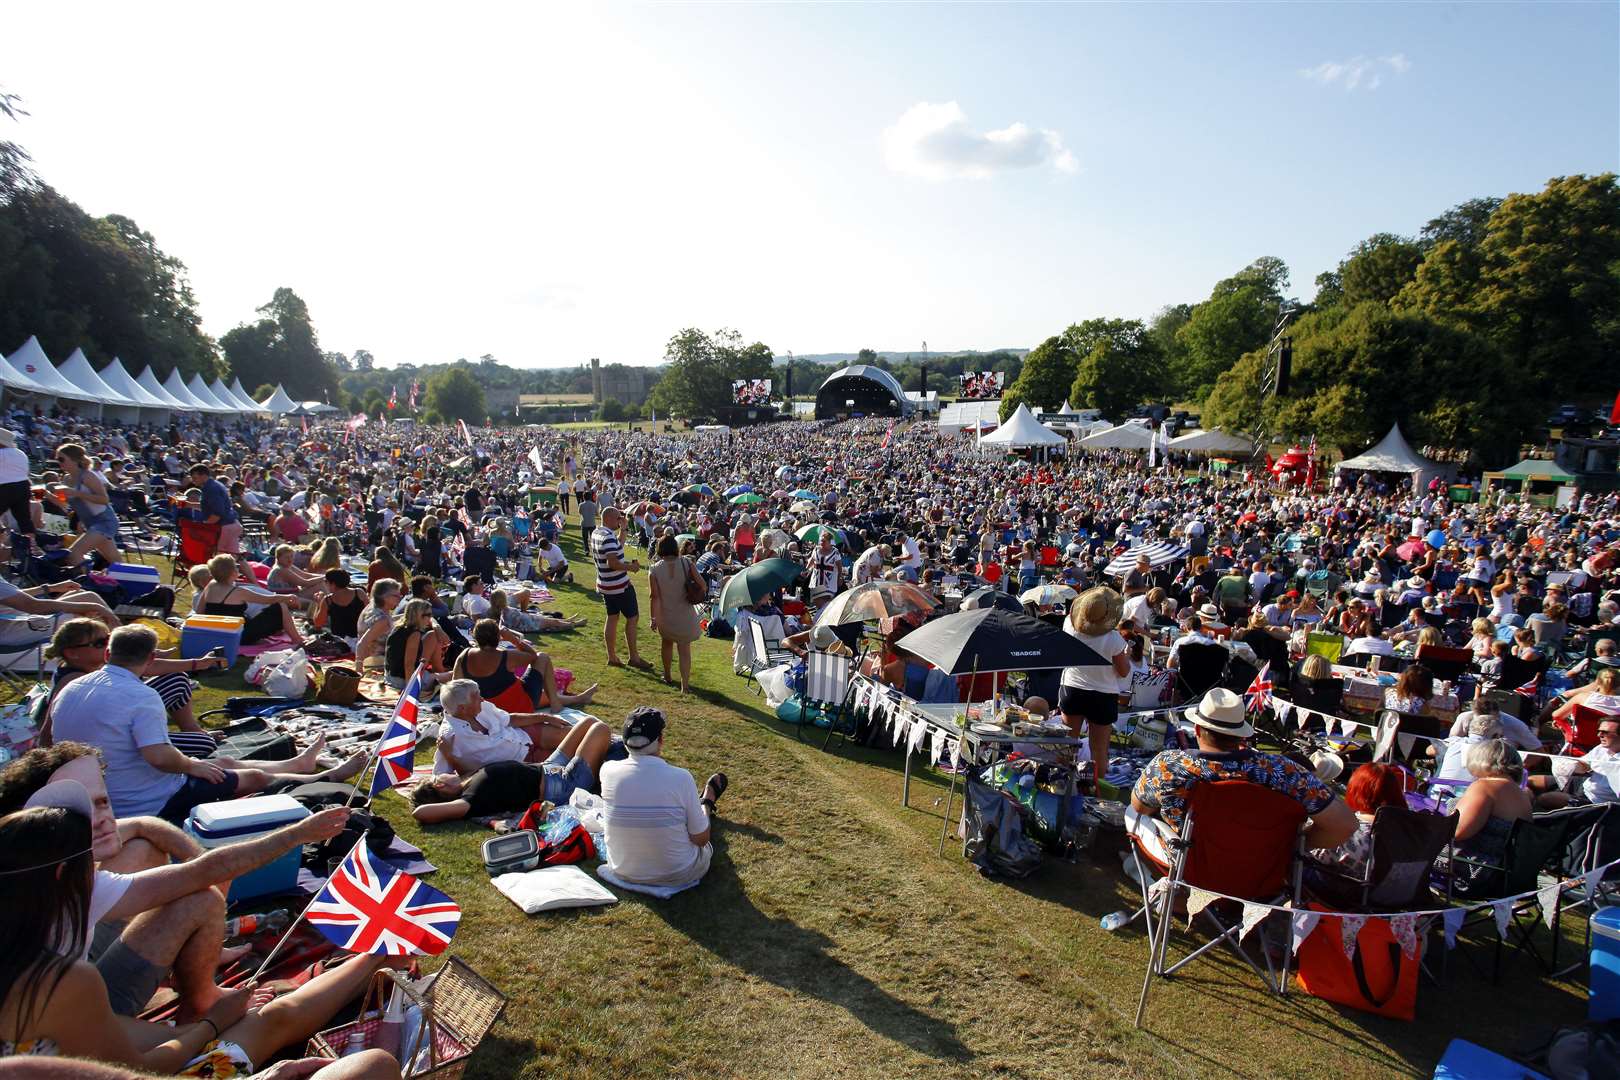 Take a seat and get into the spirit as the Leeds Castle Concert returns. Picture: Sean Aidan